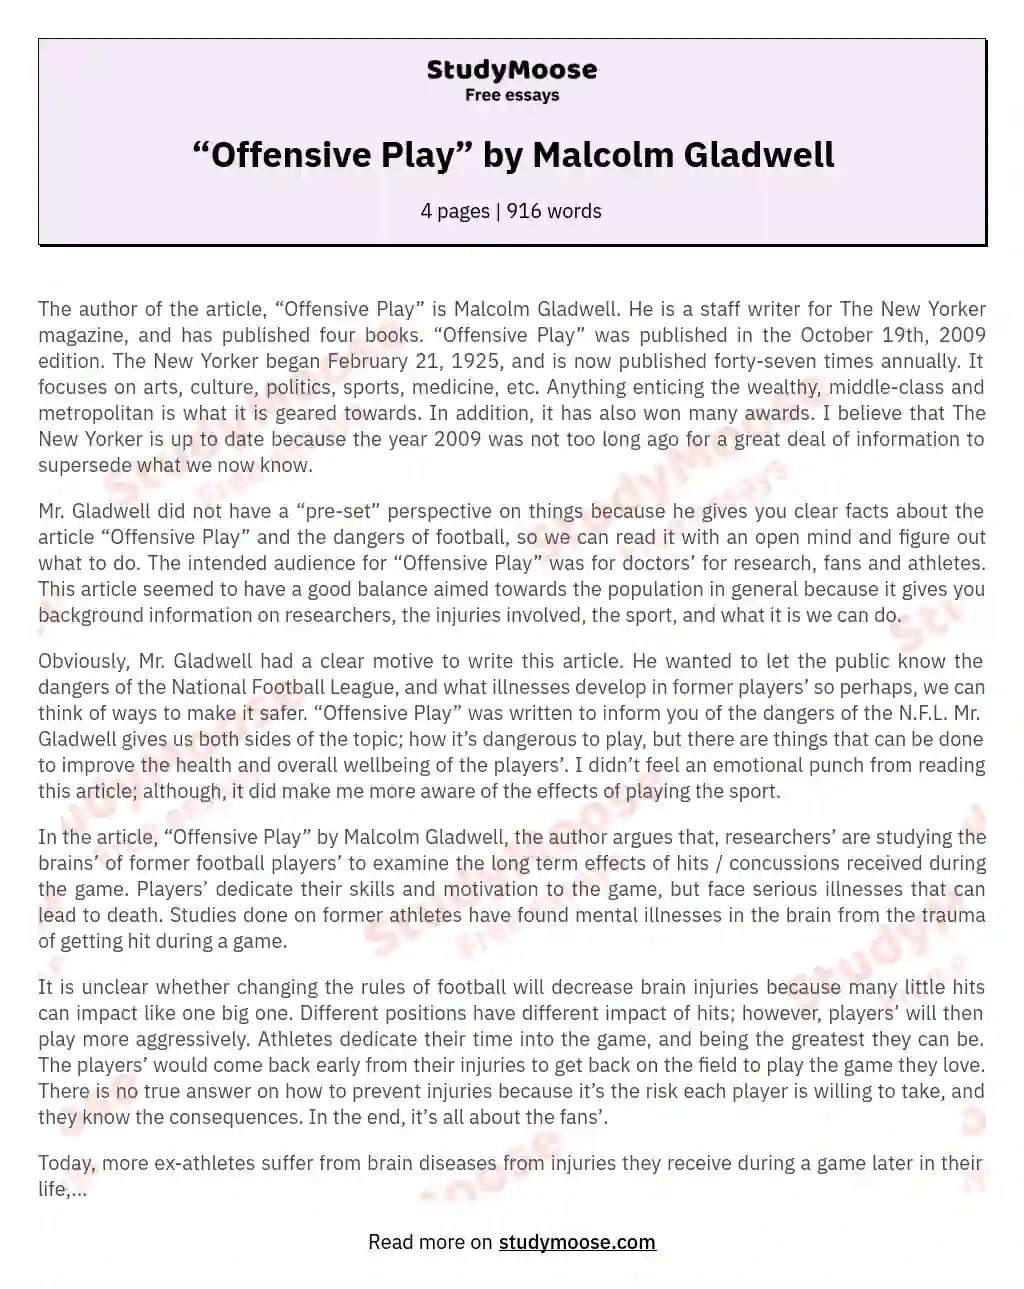 “Offensive Play” by Malcolm Gladwell essay